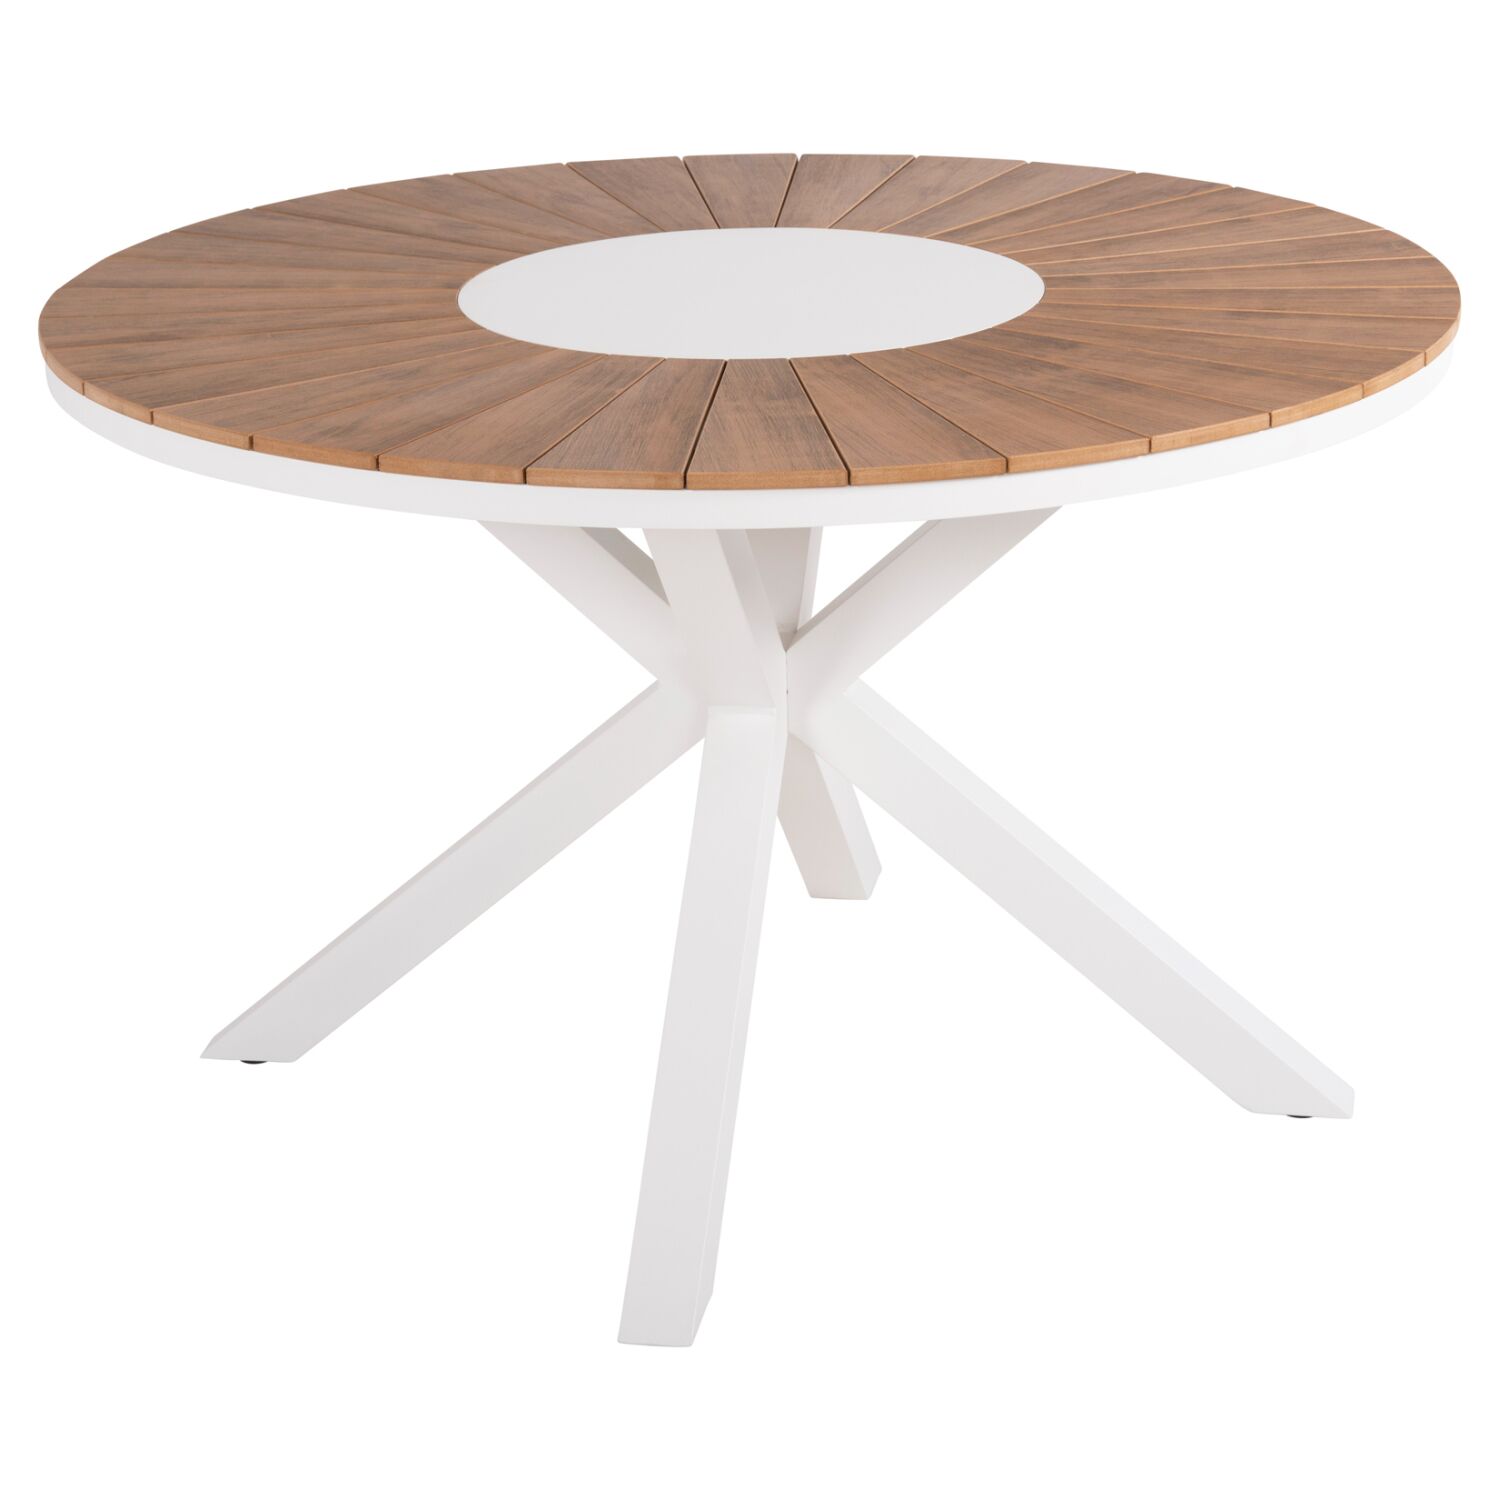 OUTDOOR ROUND TABLE MORIL HM6041.02 ALUMINUM IN WHITE-POLYWOOD IN NATURAL WOOD Φ120cm.